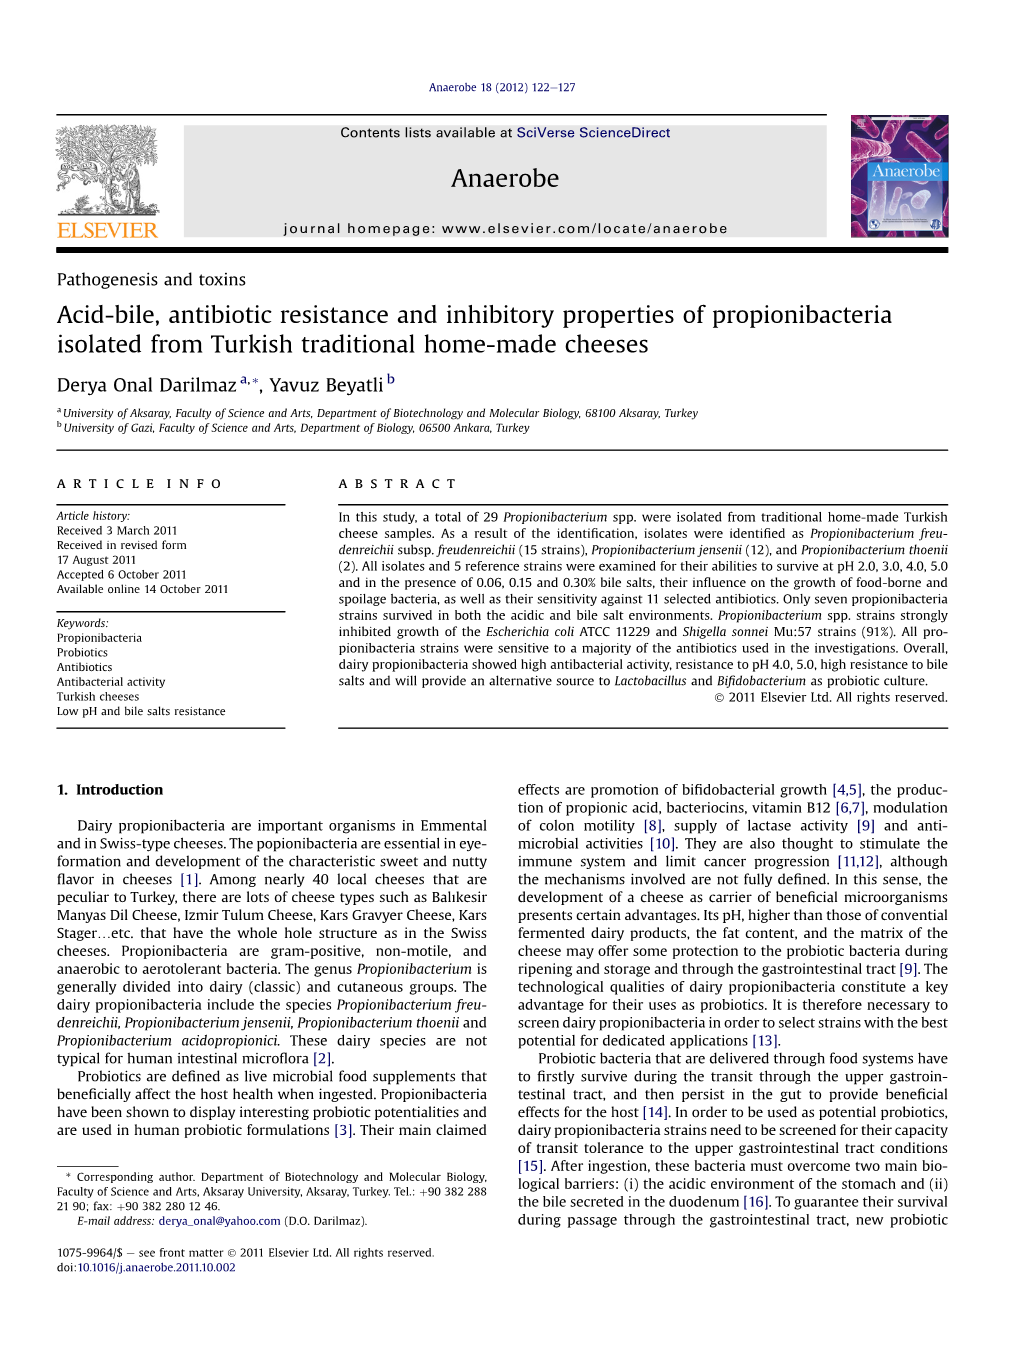 Acid-Bile, Antibiotic Resistance and Inhibitory Properties of Propionibacteria Isolated from Turkish Traditional Home-Made Cheeses